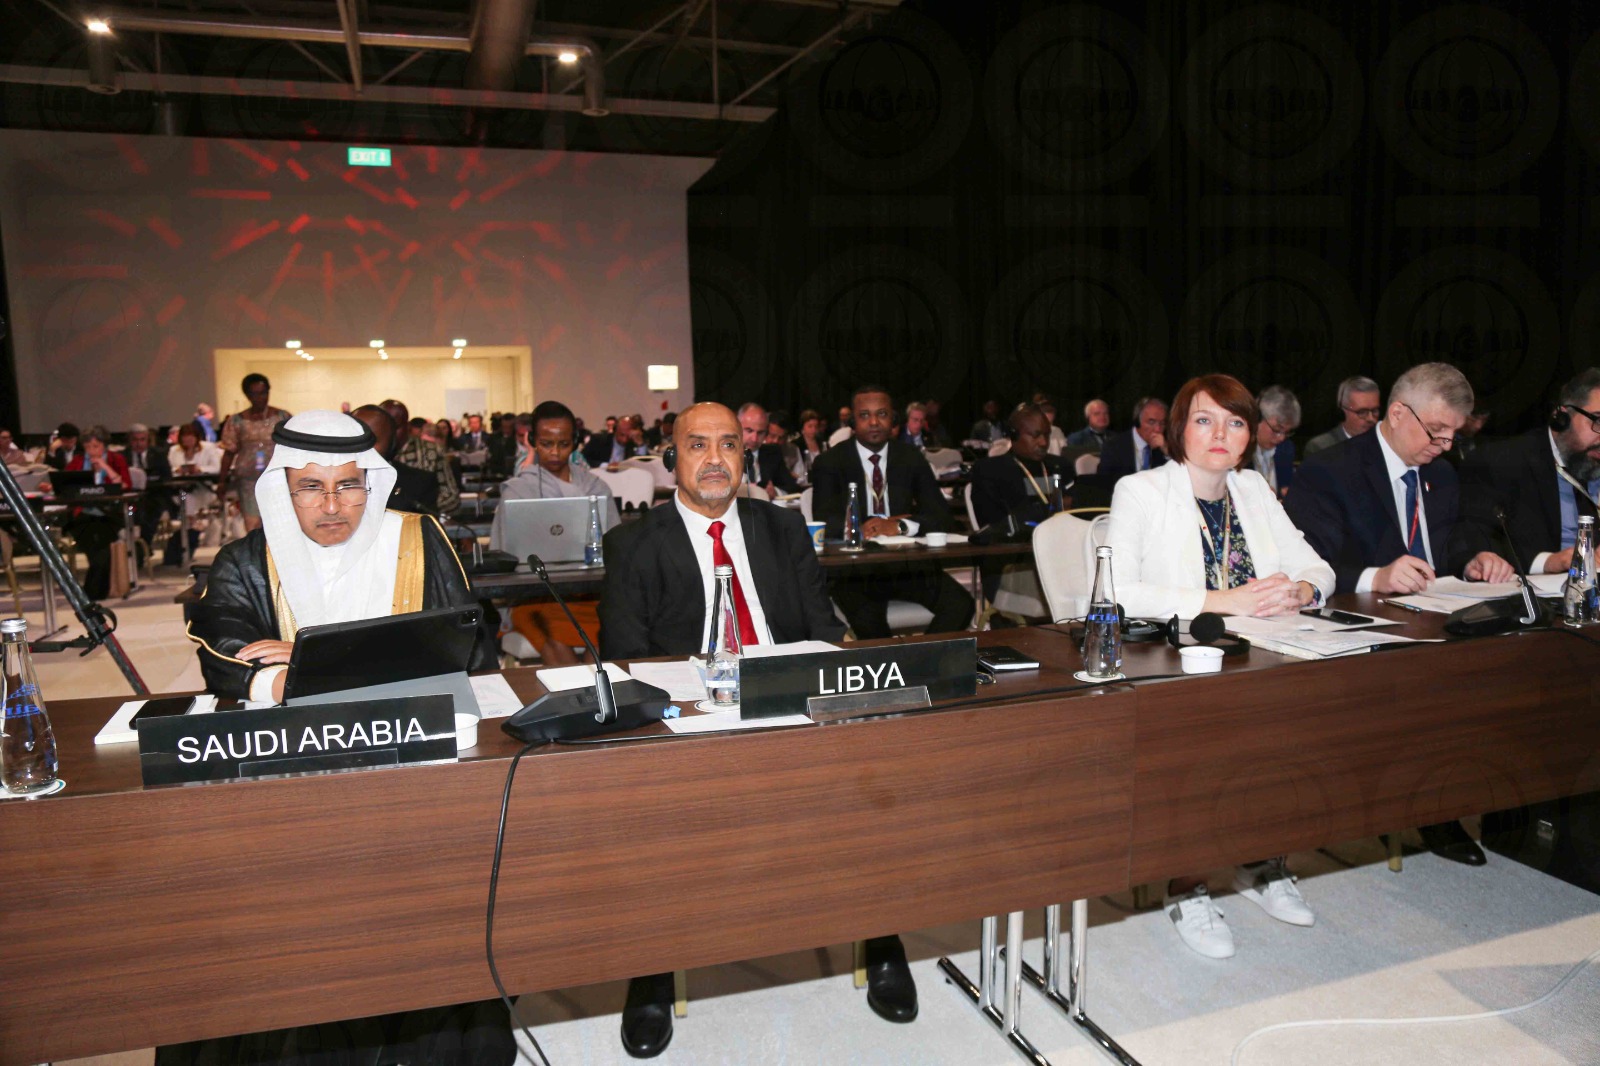 The Second Deputy Speaker of Parliament participates in the meeting of the Standing Committee on International Peace and Security of the Inter-Parliamentary Union in Doha.